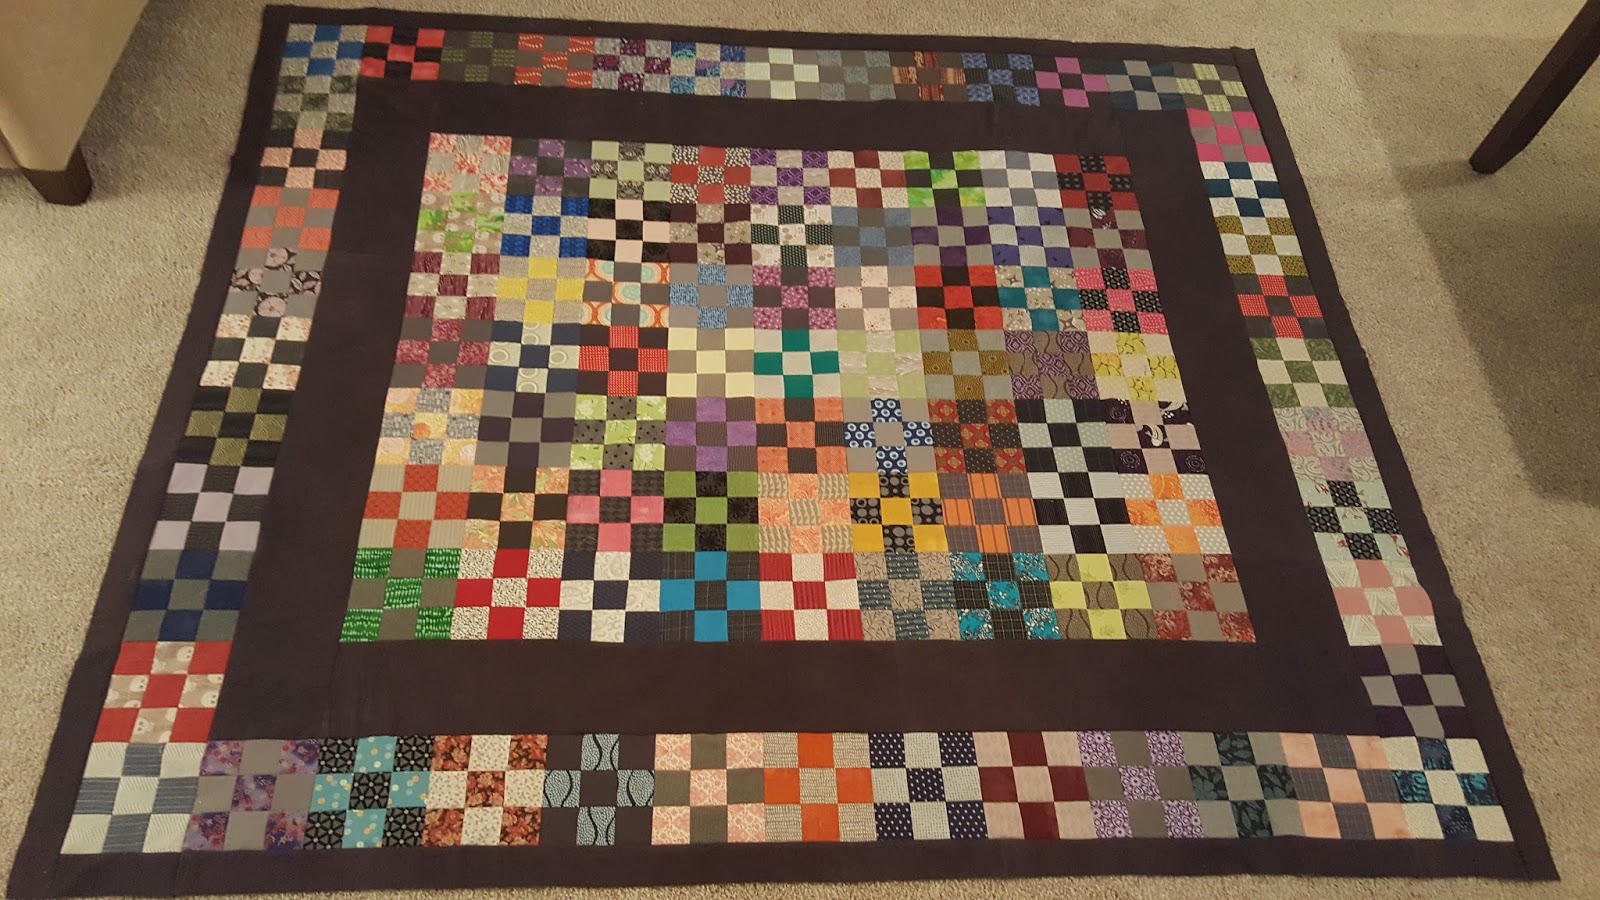 Blahg Blahg Blahg: All the Quilts - Just Pictures!